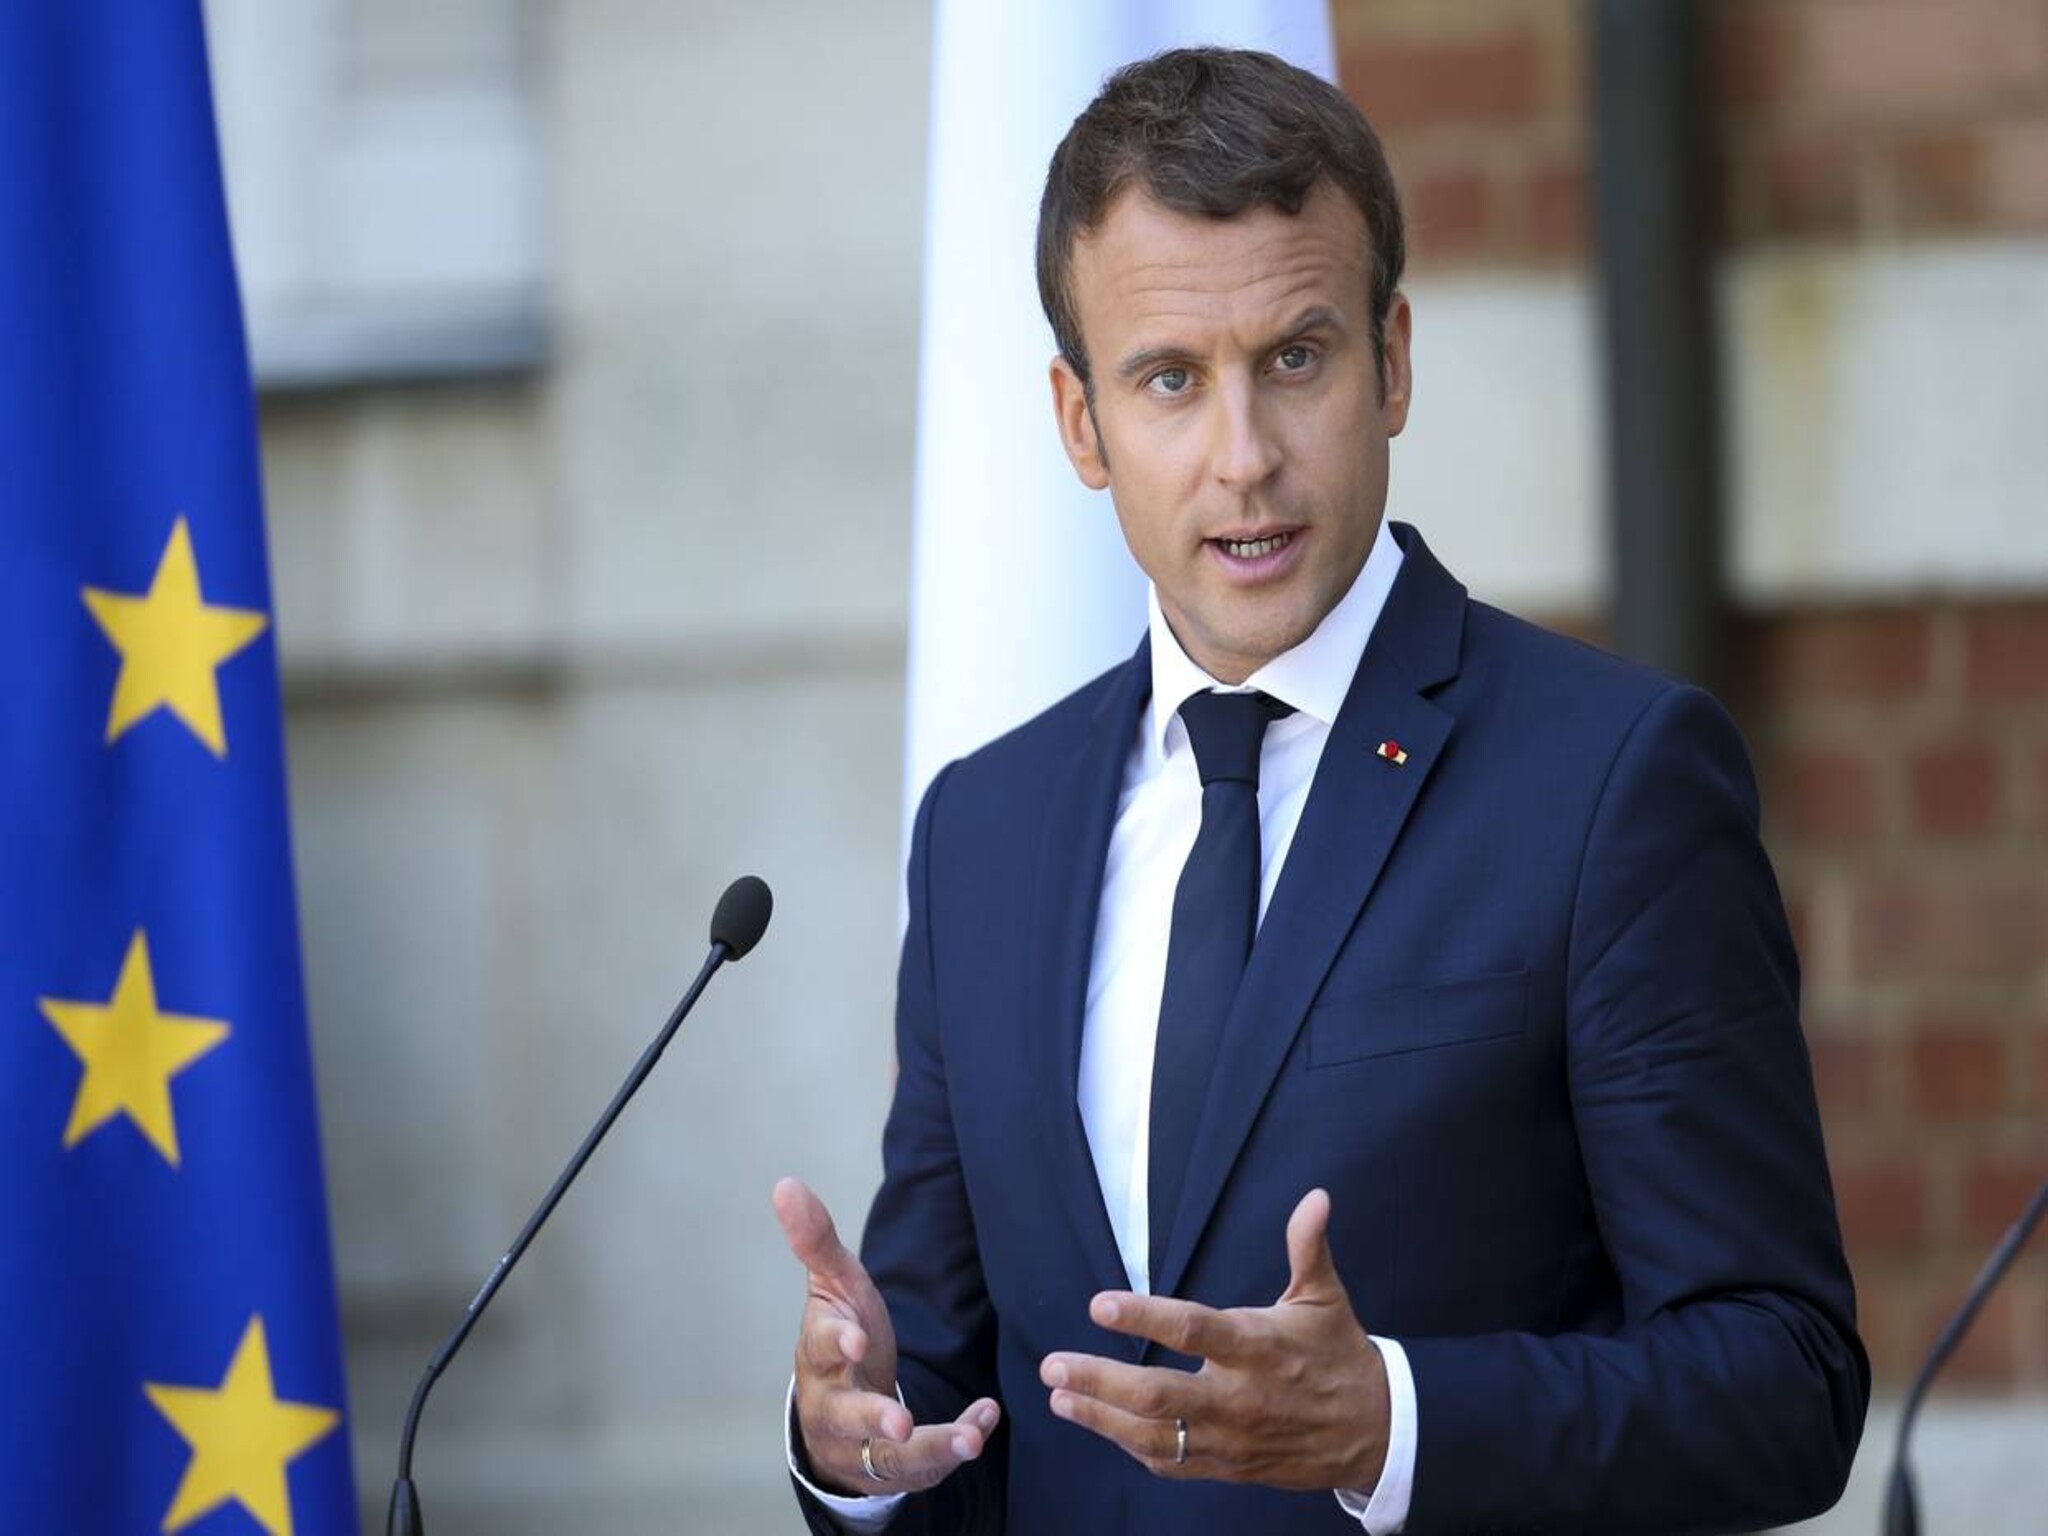 Macron: Ready to start a discussion about European defense that includes nuclear weapons